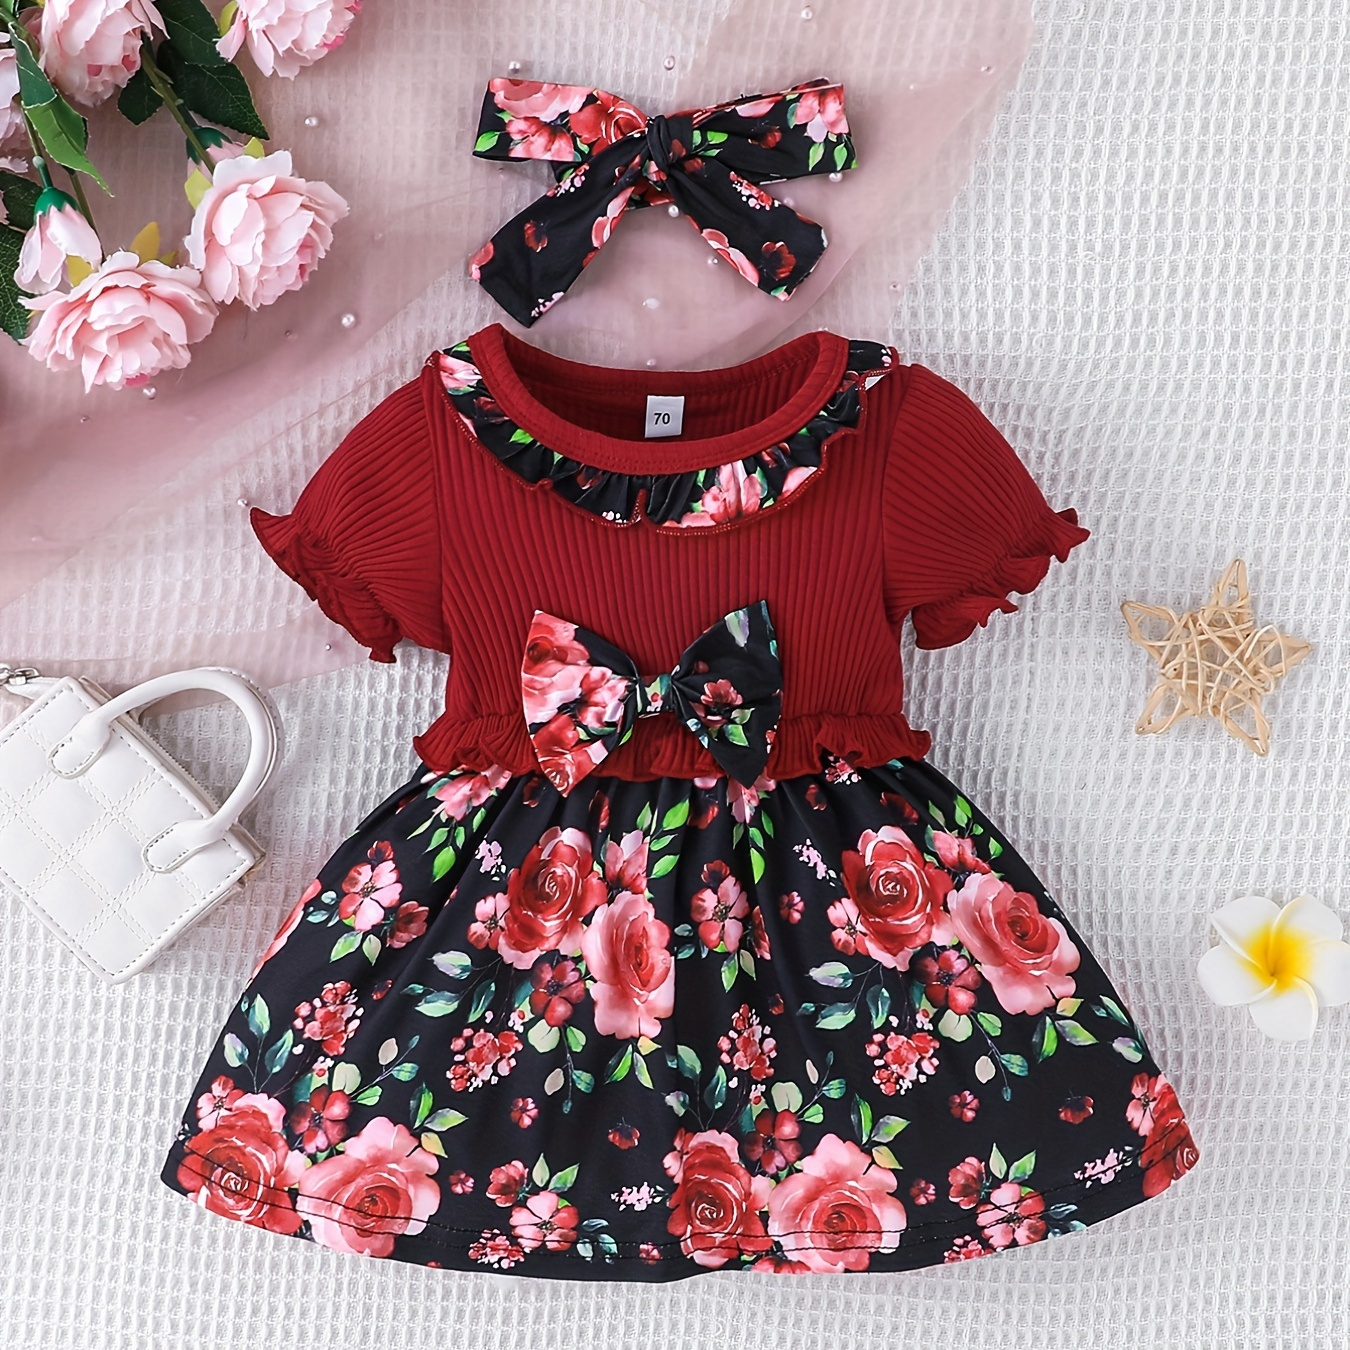 

Baby Girls Cute Casual Ruffled Stitching Flower Ribbed Dress & Bow Headband Set For Summer Holiday